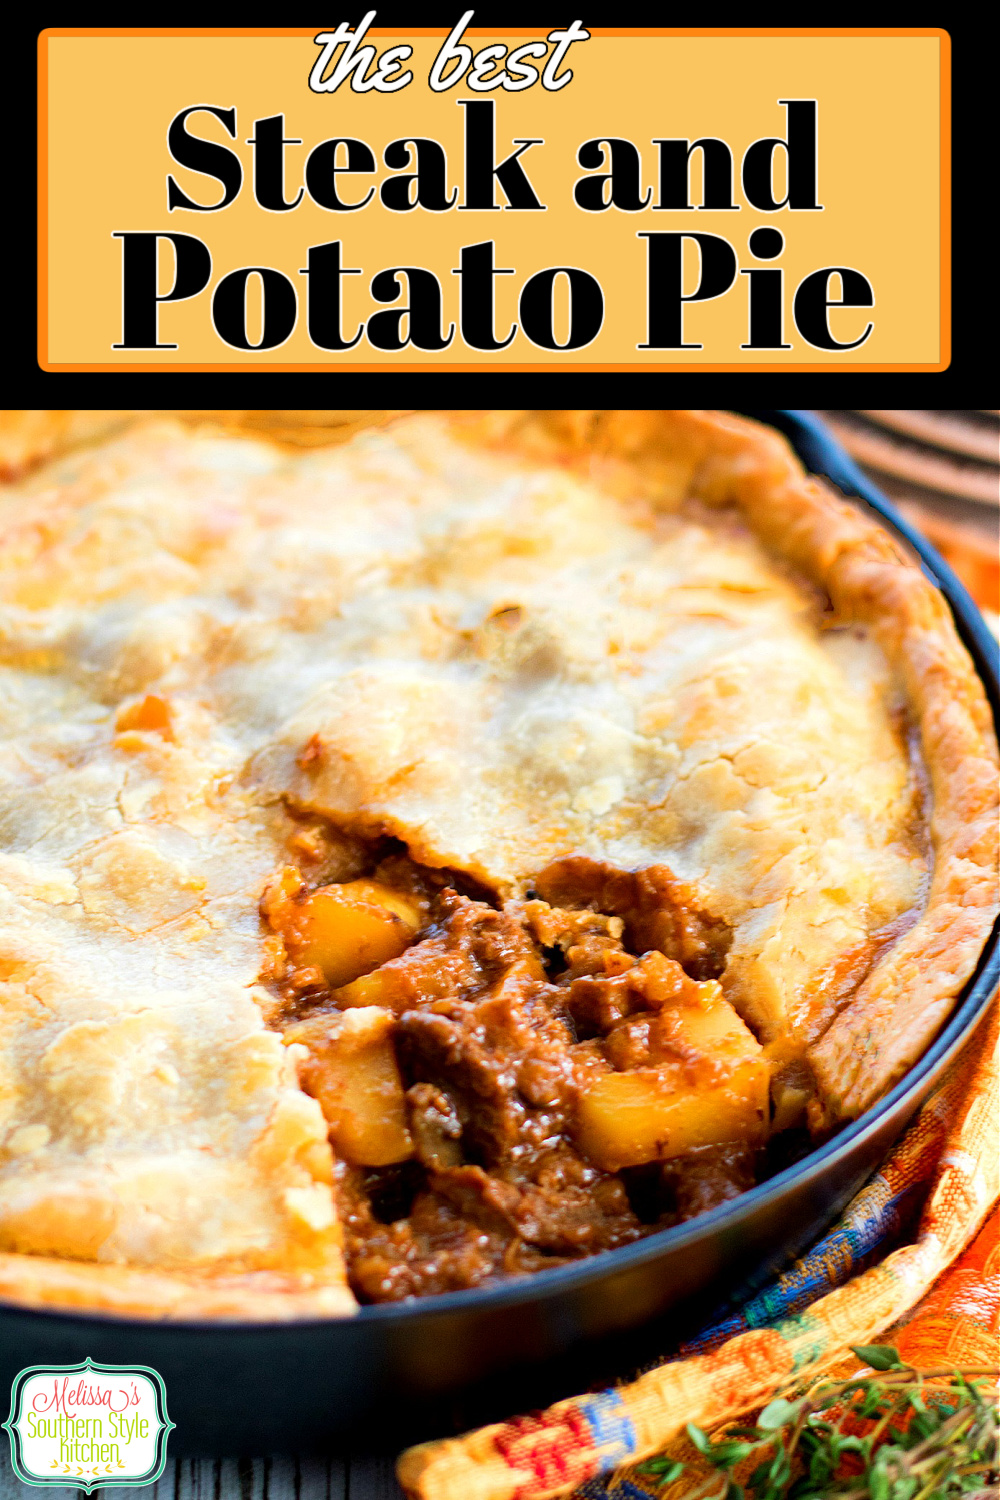 This double crust steak and potato pie will have your hungry eaters running to the table #steakandpotatopie #potpie #steakrecipes #potatoes #beefrecipes #dinnerideas #dinner #steakpie #pasties #southernfood #southernrecipes via @melissasssk